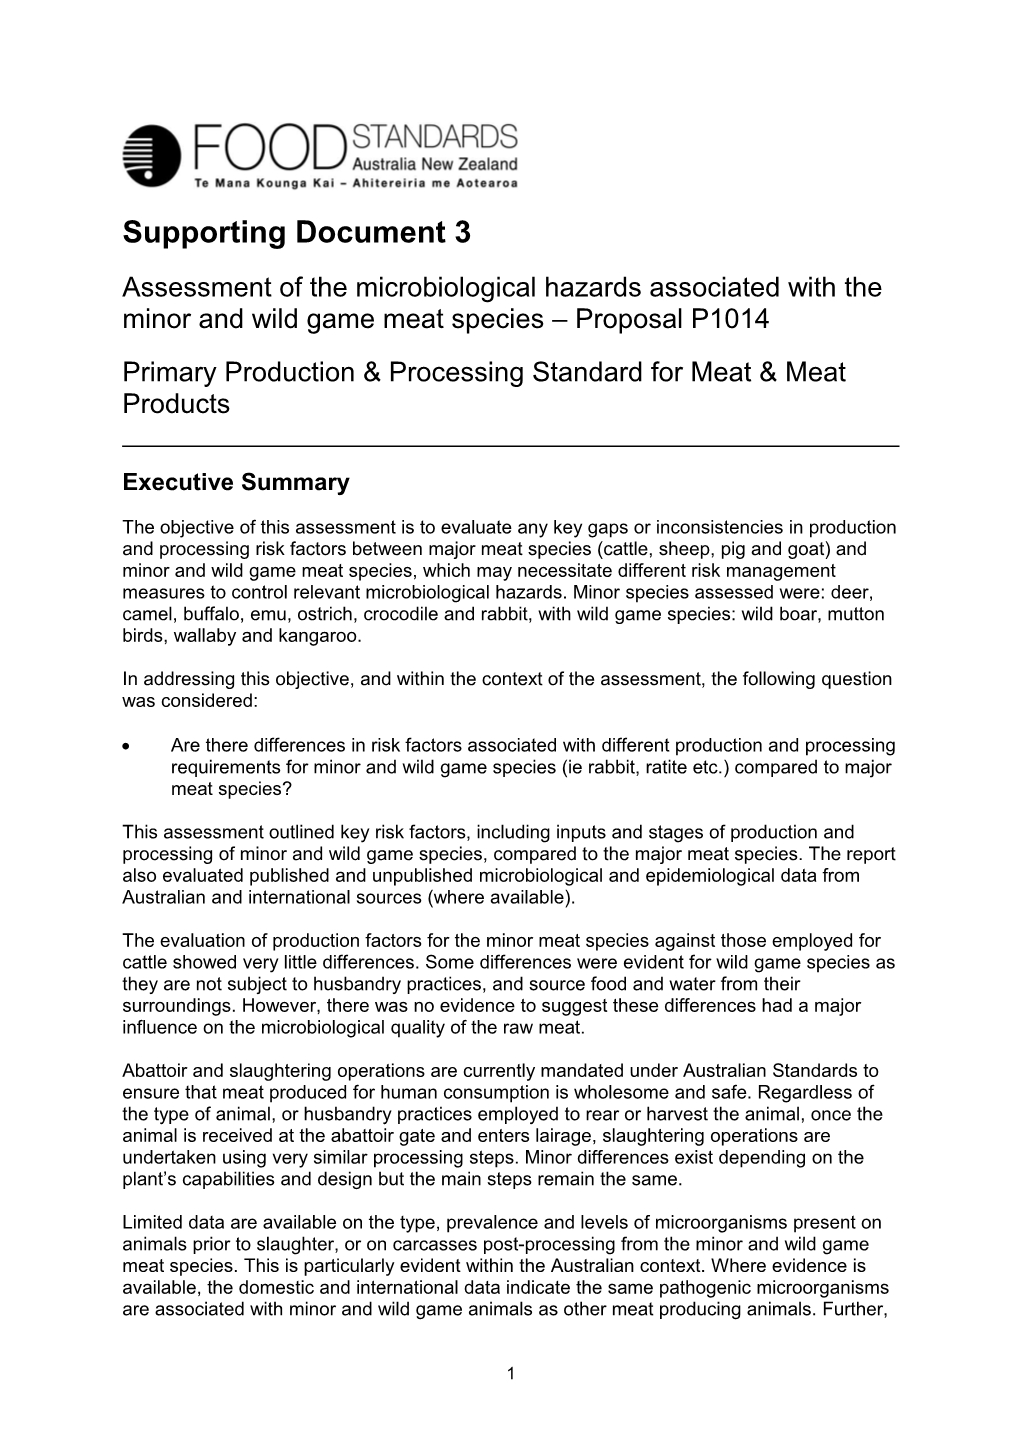 Primary Production & Processing Standard for Meat & Meat Products